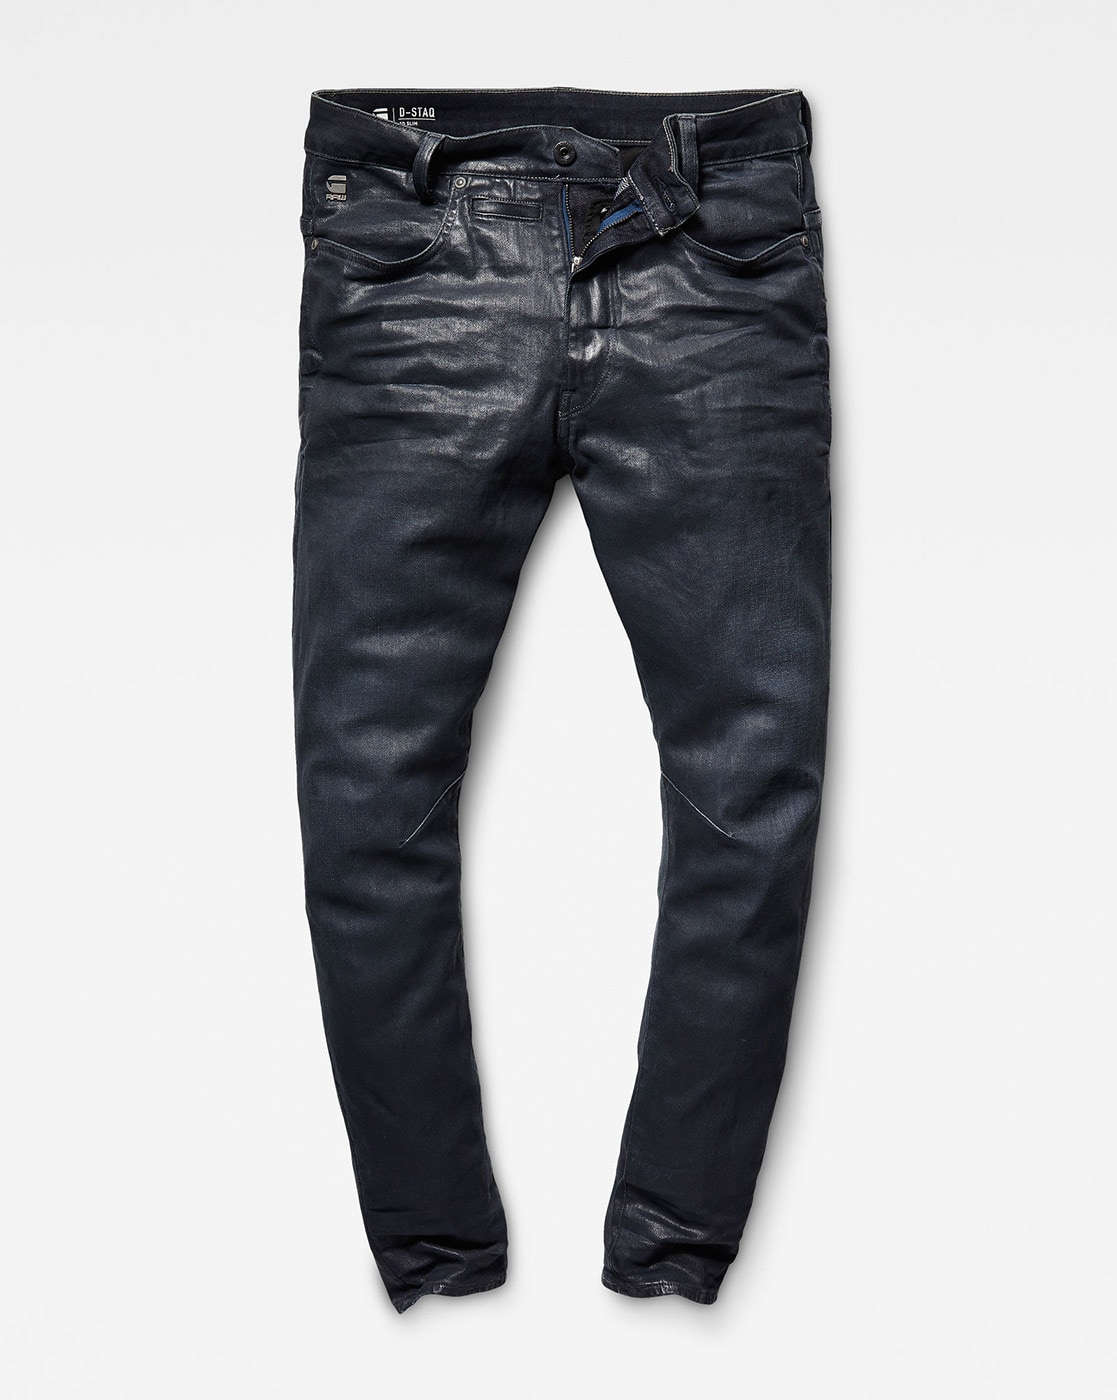 Buy Blue Jeans for Men by G STAR RAW 